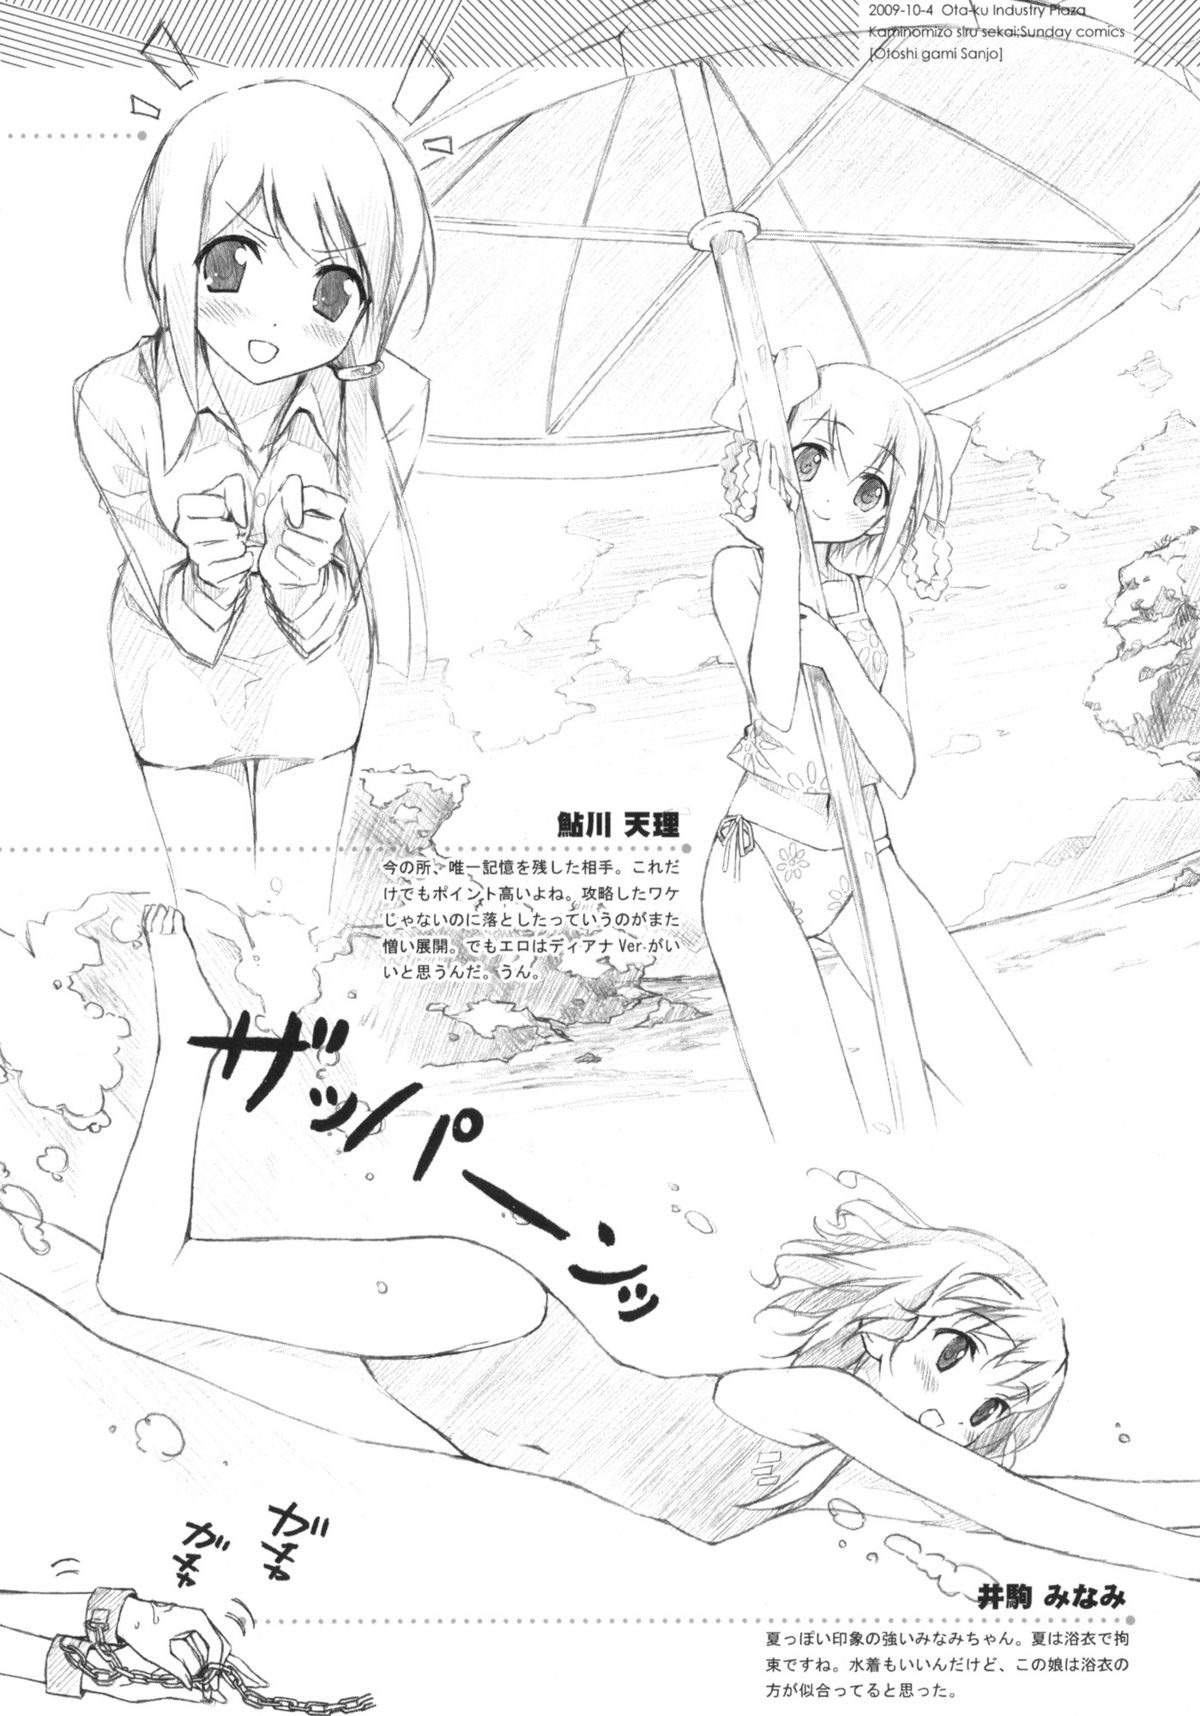 [Afterschool of the 5th Year] Tachiyomi Senyo vol.29 (The World God Only Knows) page 15 full